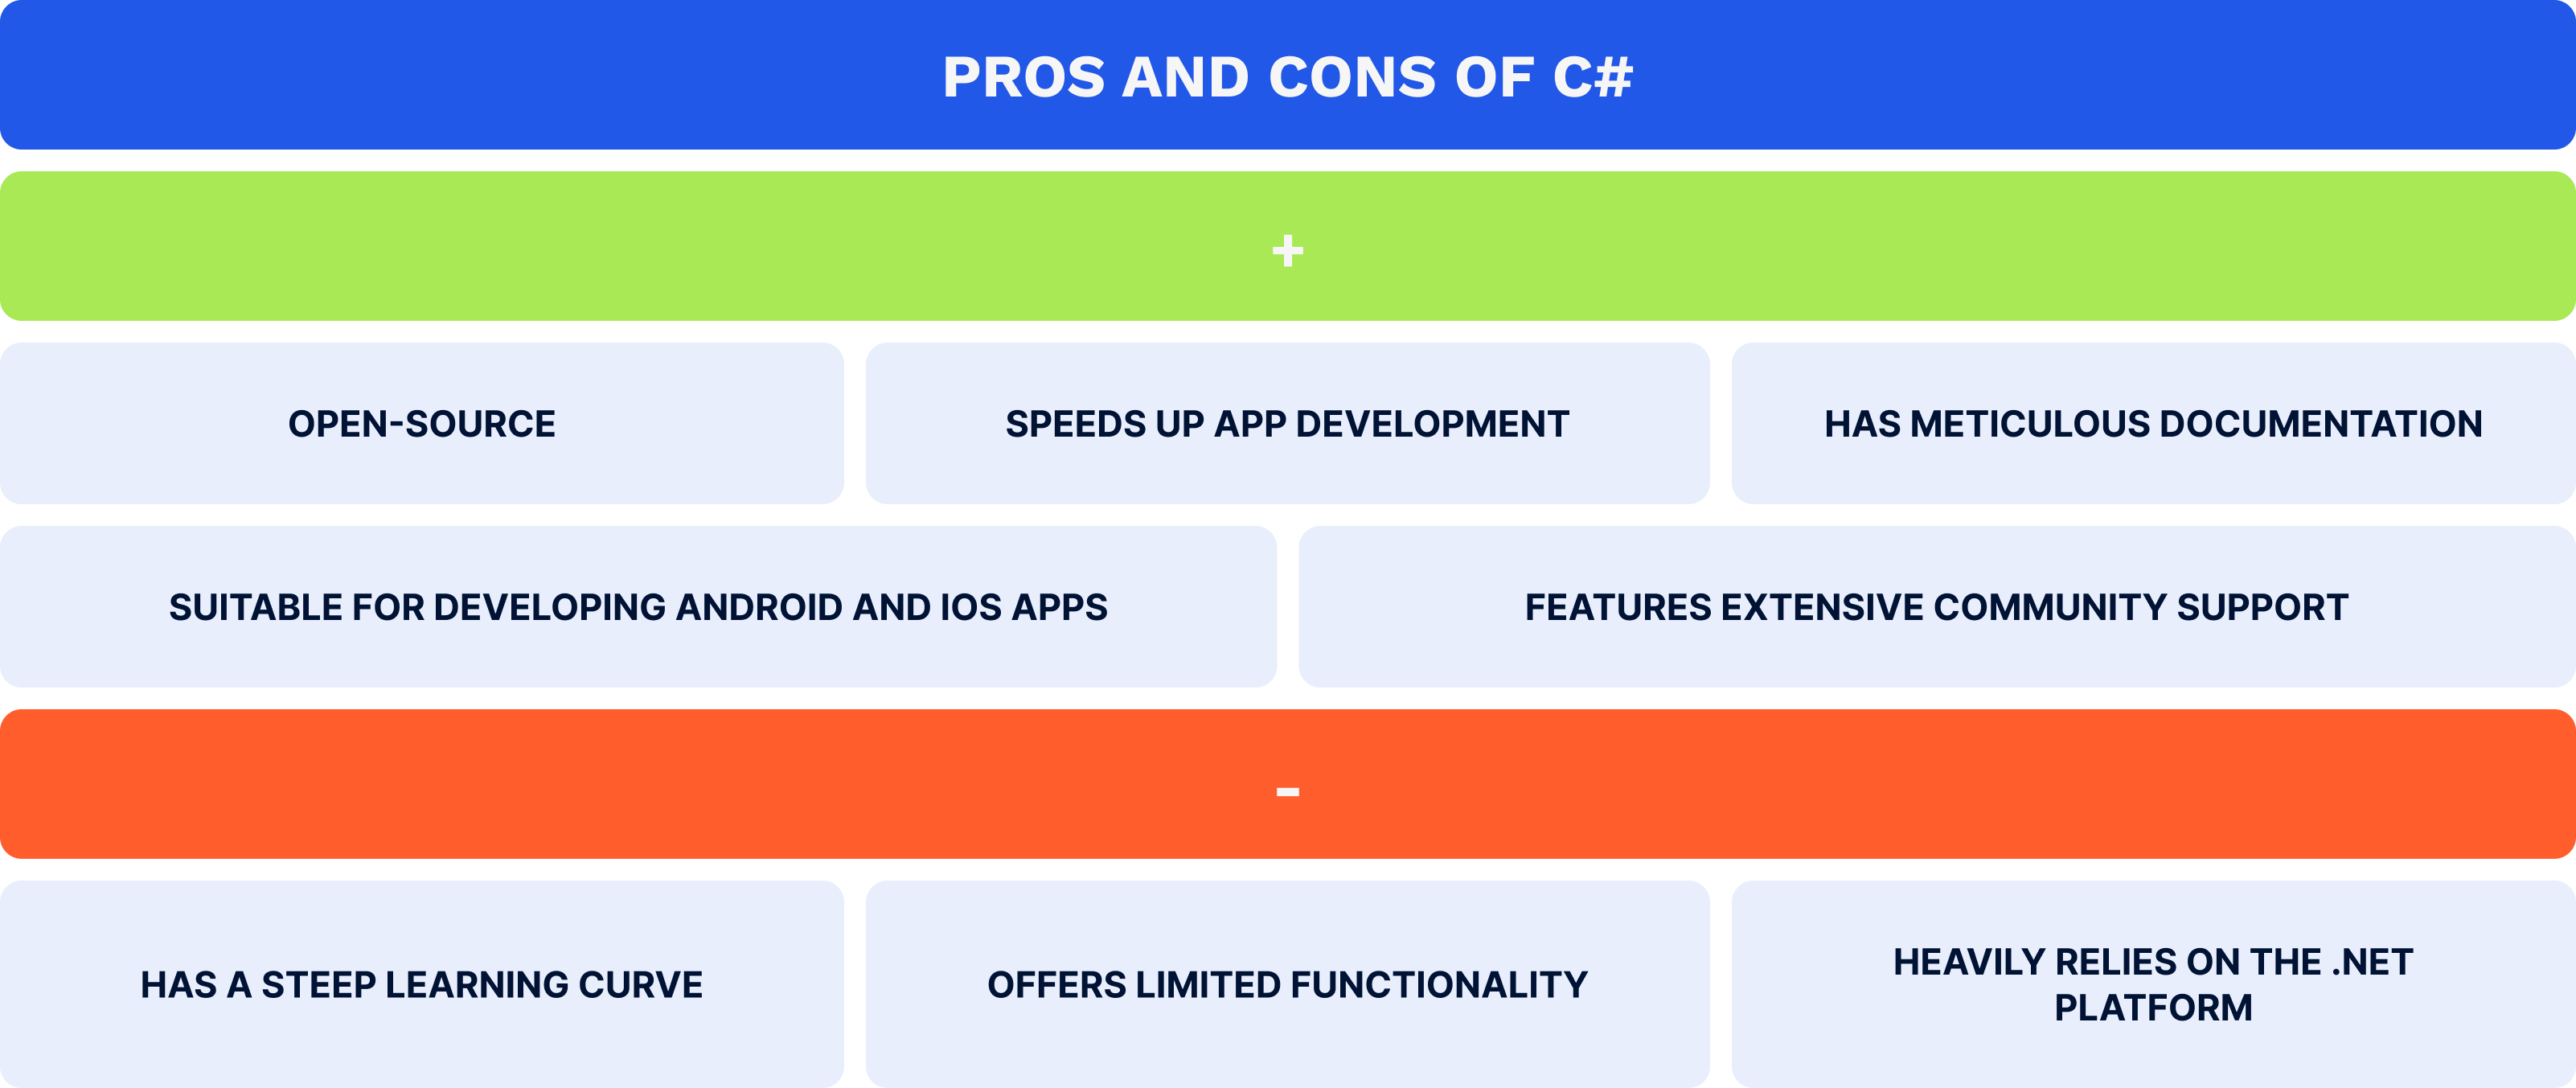 Pros and cons of C#